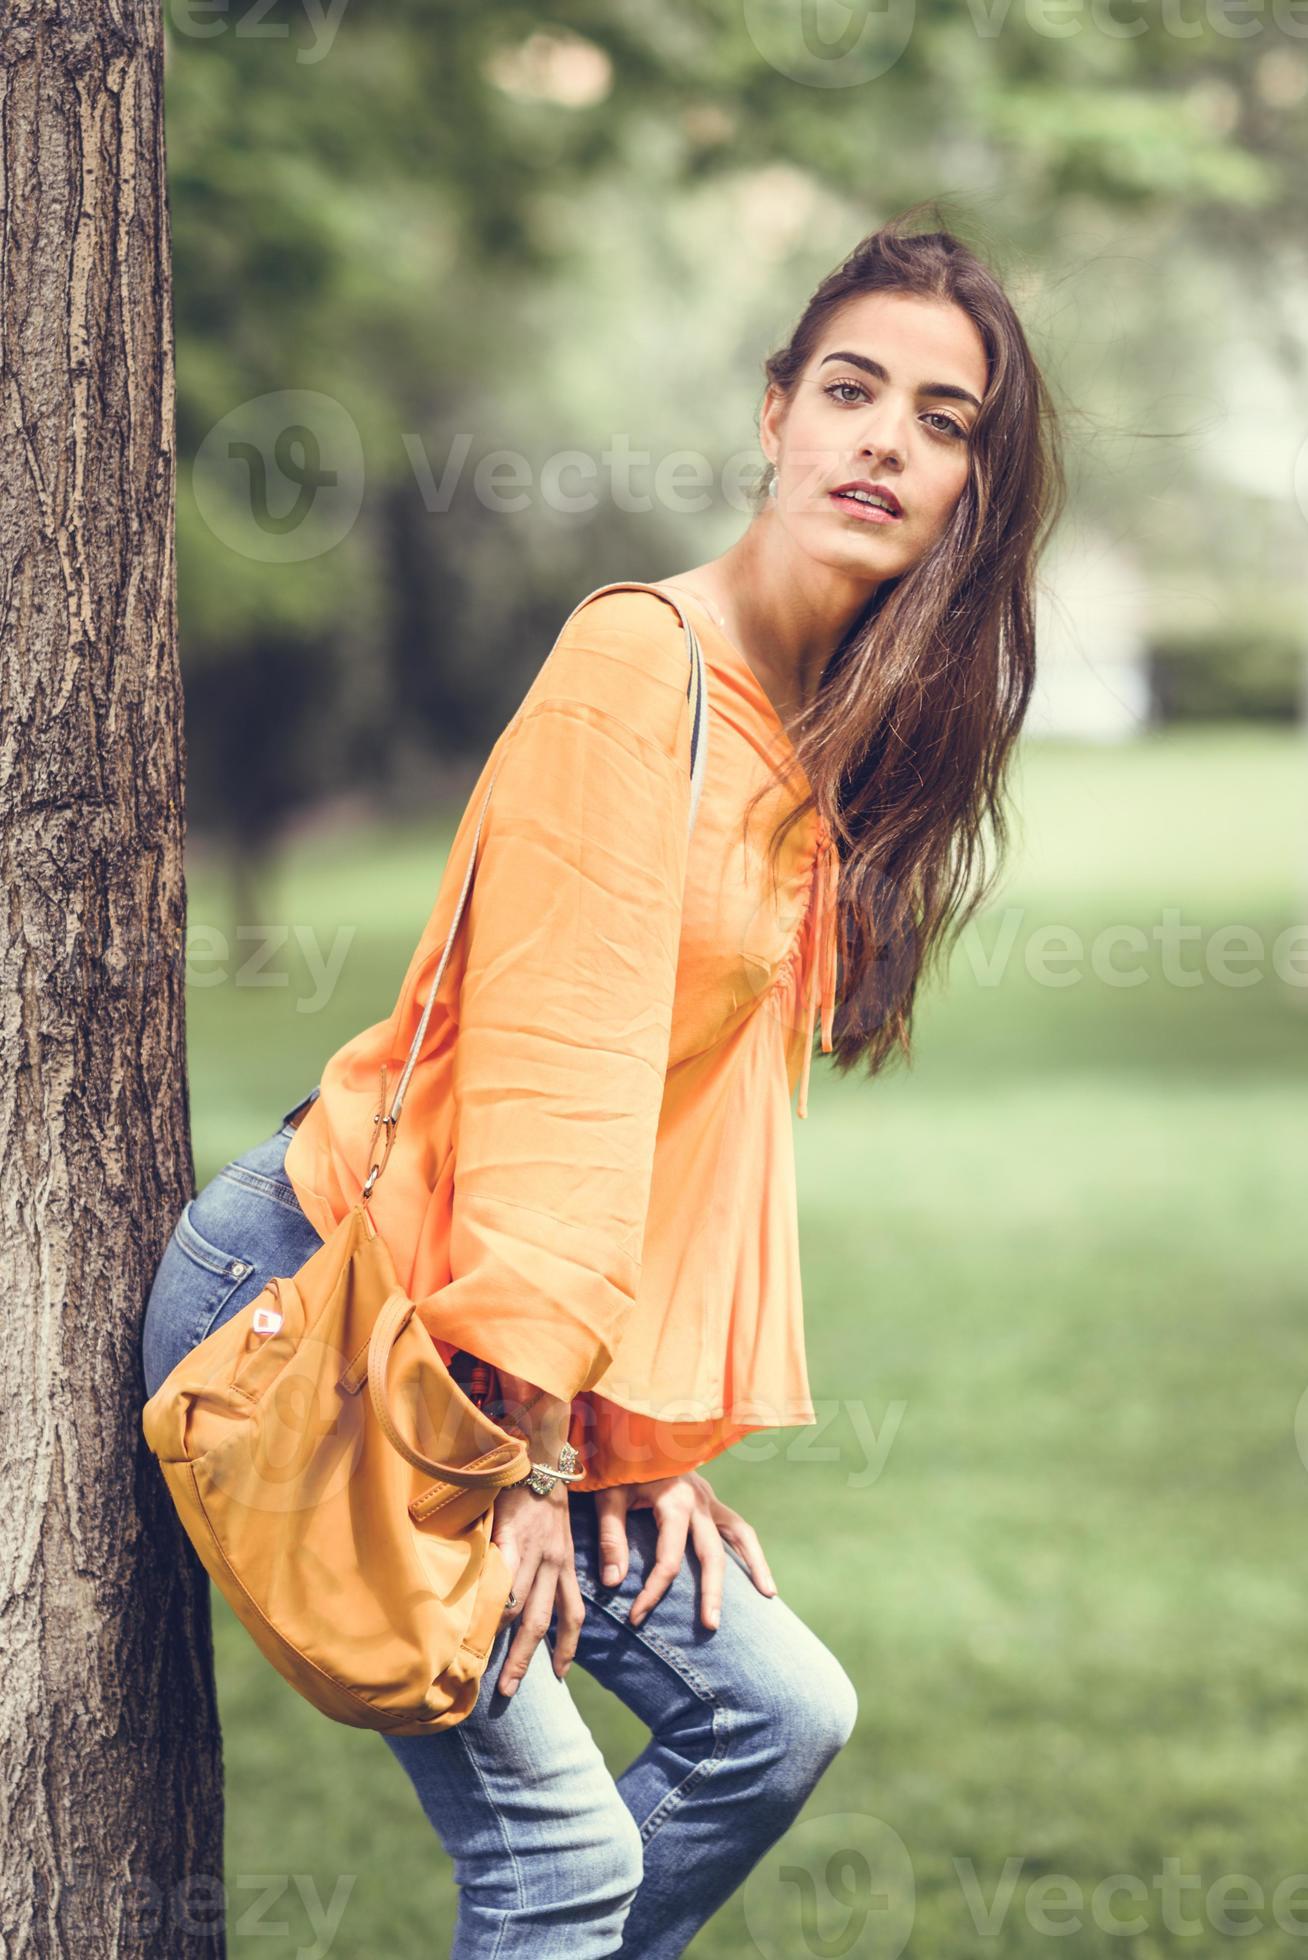 Woman with nice hair wearing casual clothes in urban background. 5885704  Stock Photo at Vecteezy